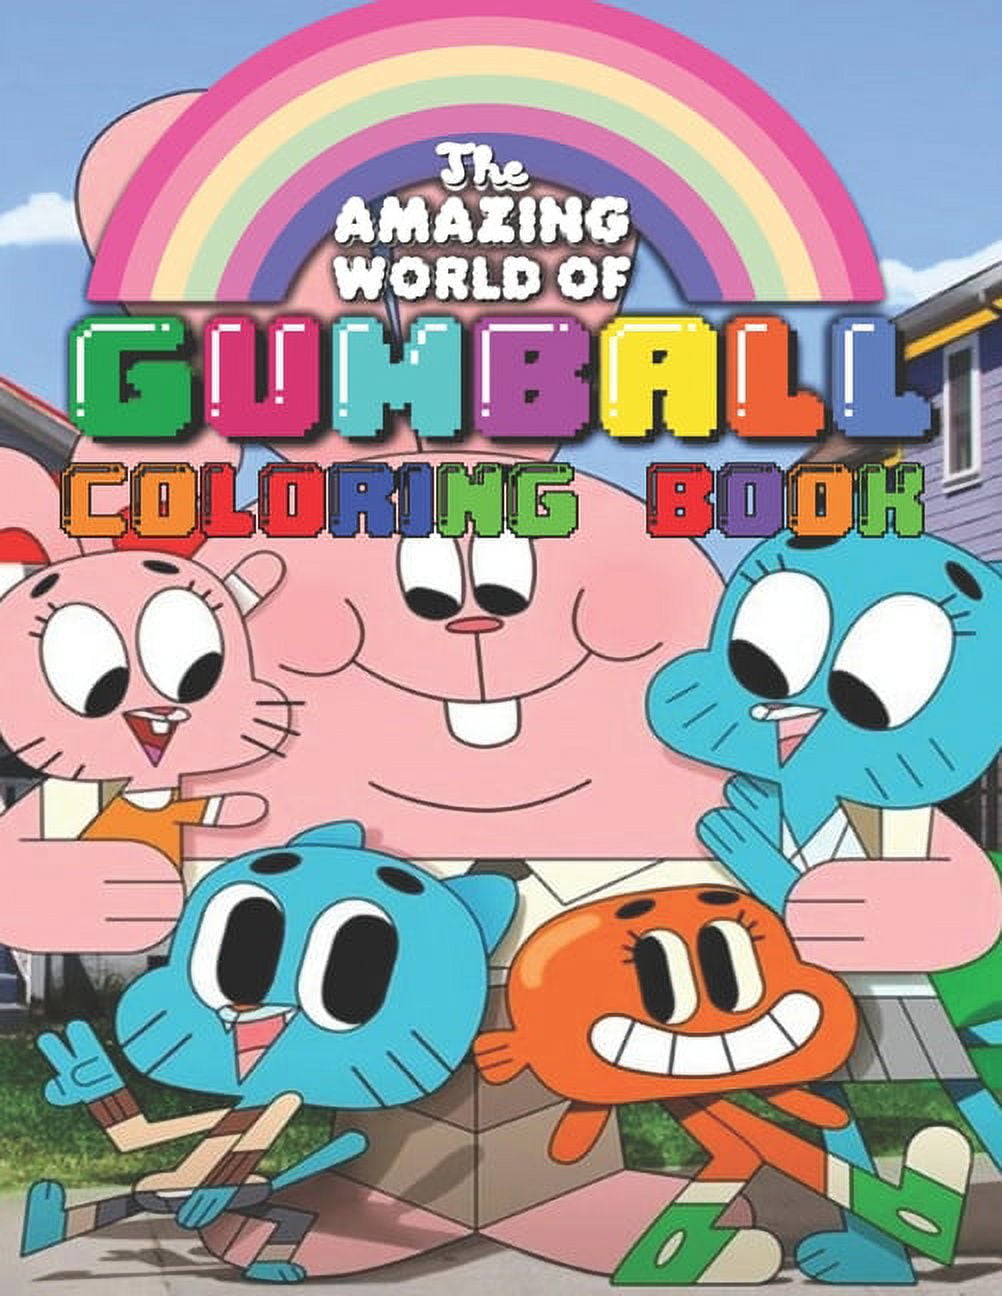 We wrote an episode of Gumball in Minecraft 